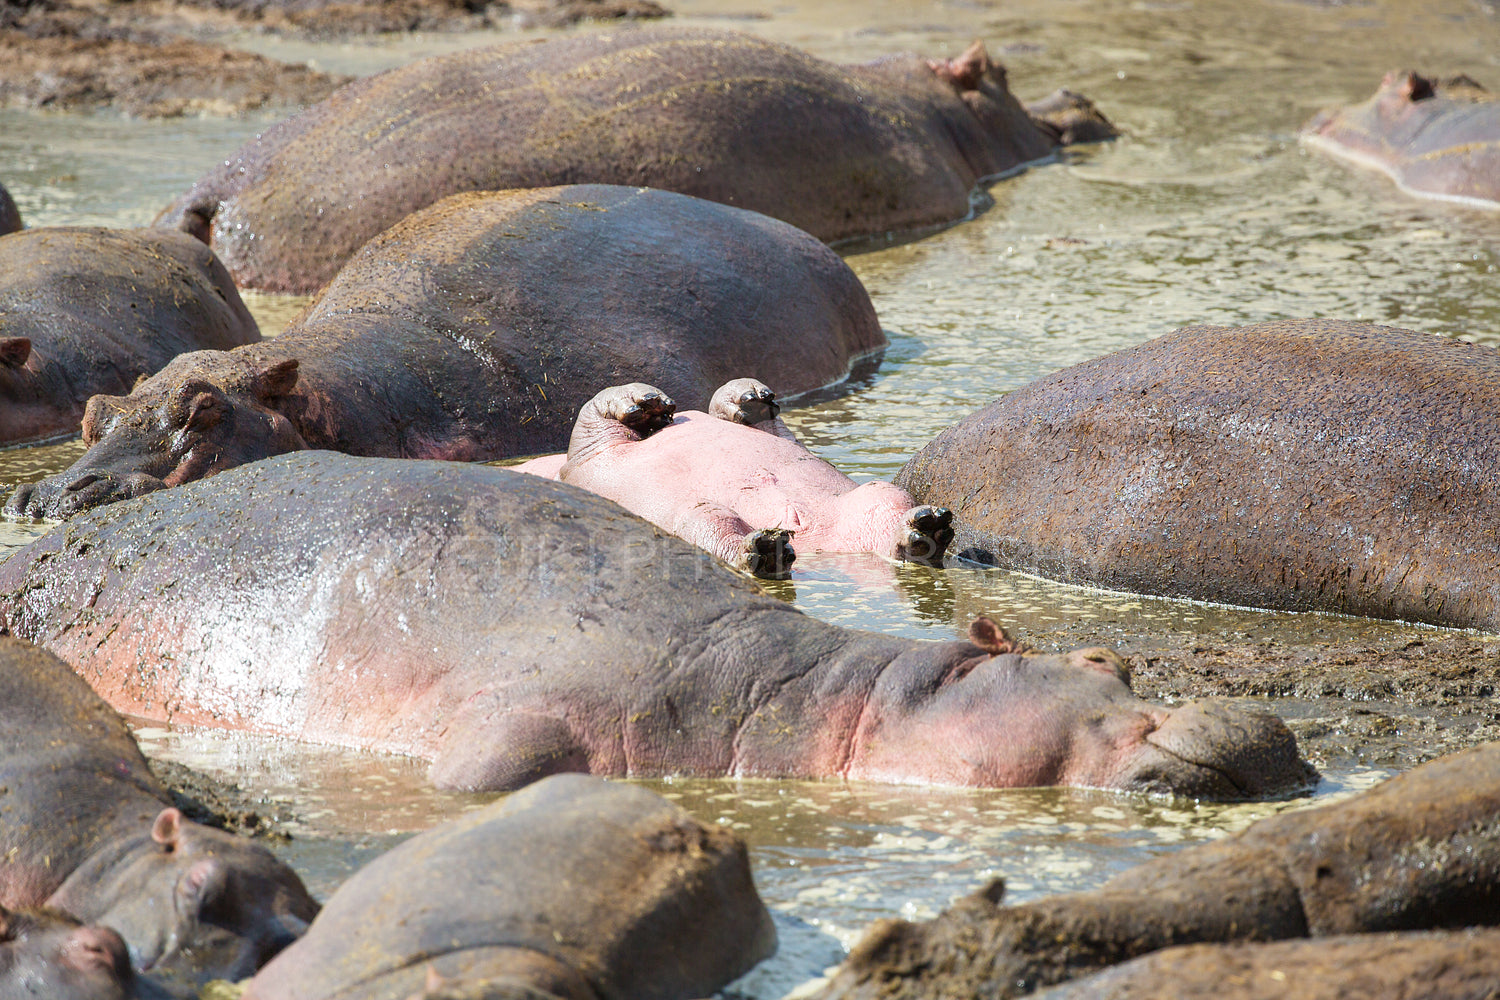 Young hippo sleeps upside down in water